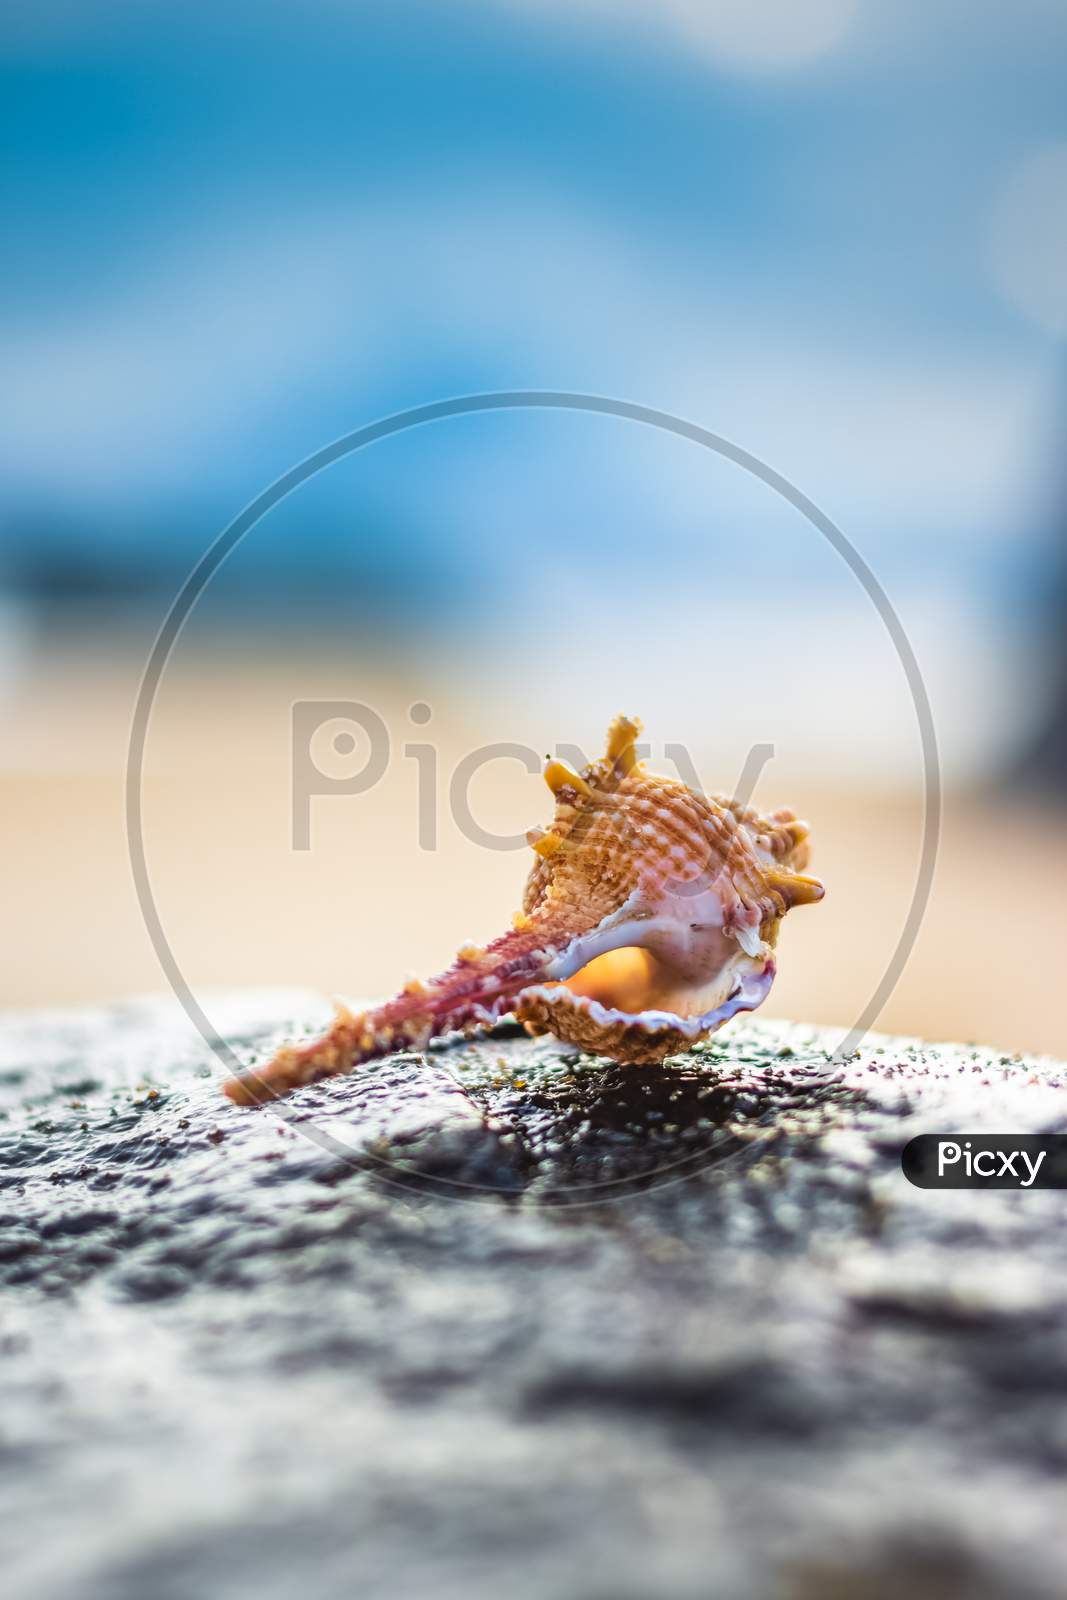 Seashell In The Beach Rock On The Background Of Beach And Sea - (Shallow Dof). Beach With Conch Seashell Under Blue Sky At Sunrise. Single Shell On Beach Seascape.